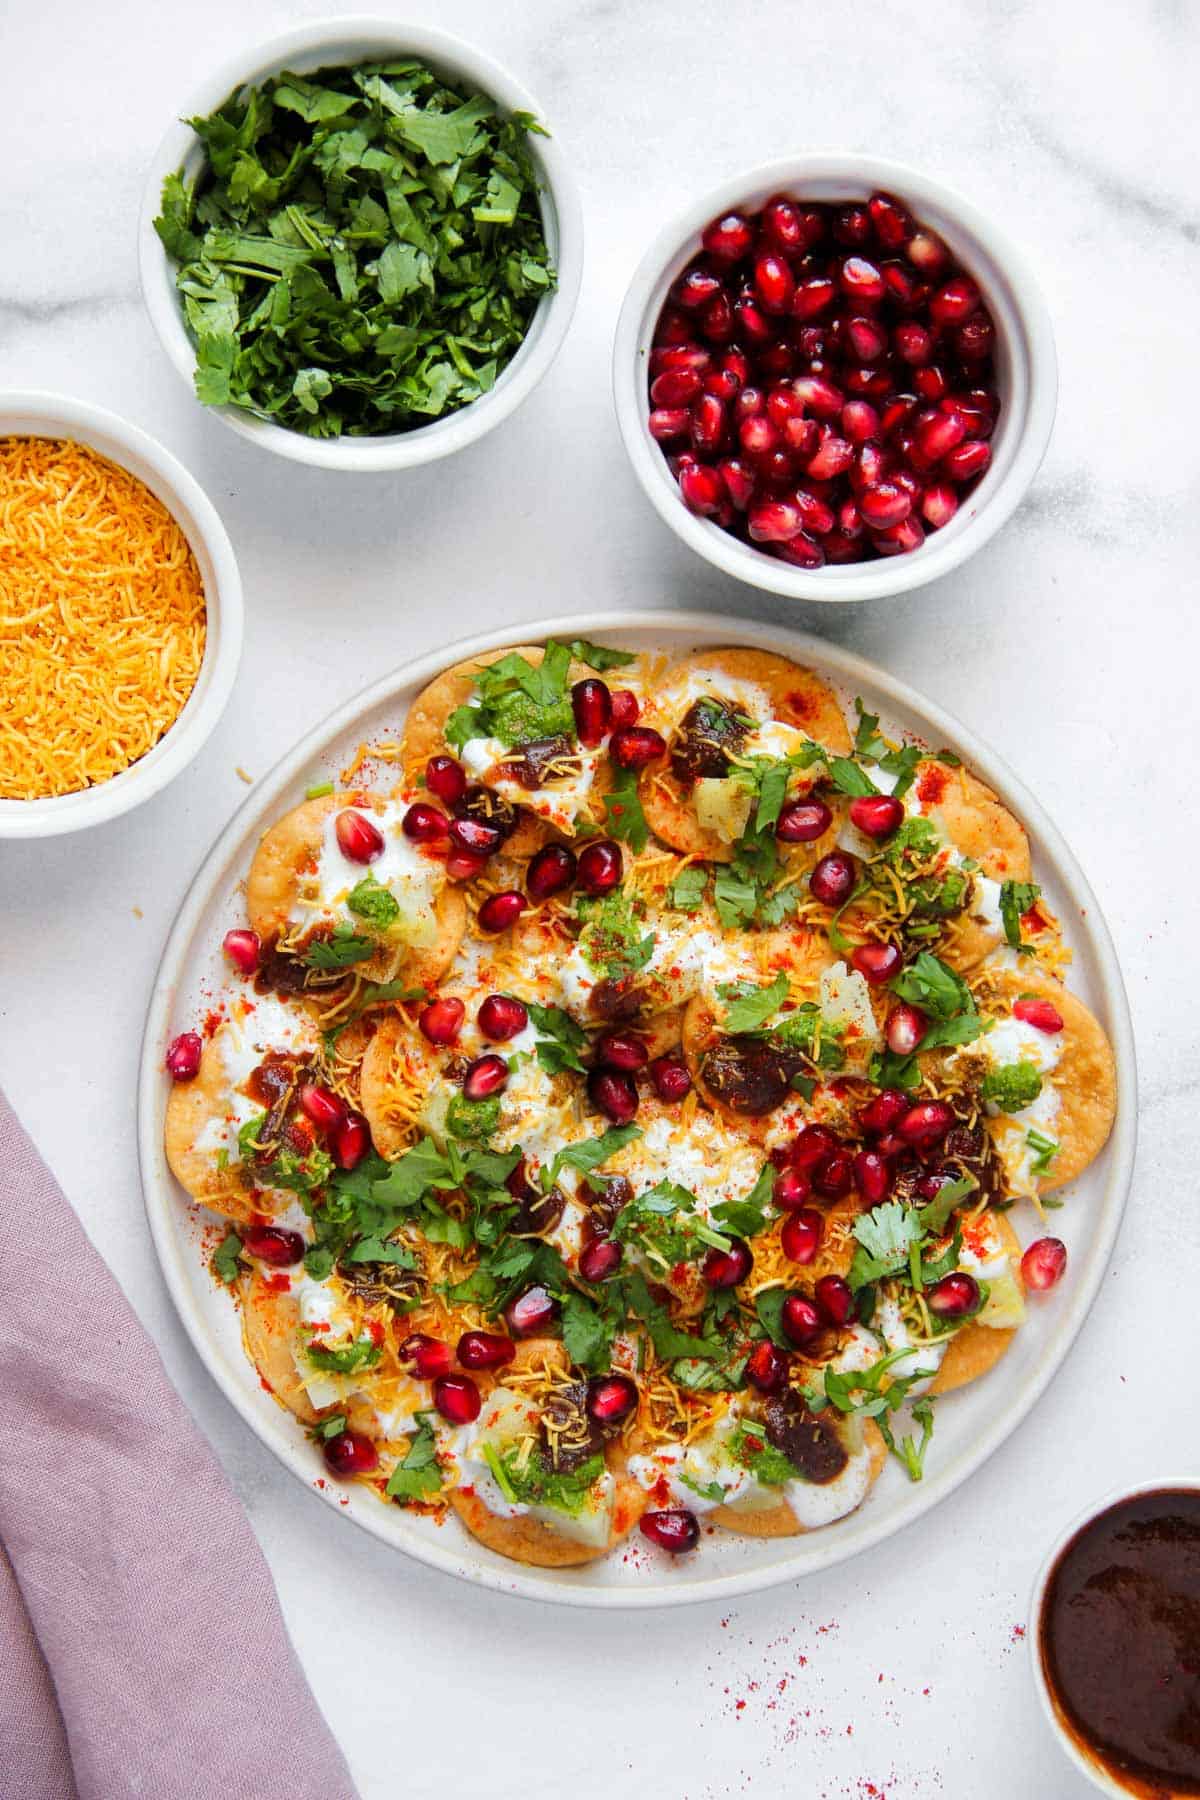 Papdi chaat served in a white platter with garnishes on the side in small bowls.